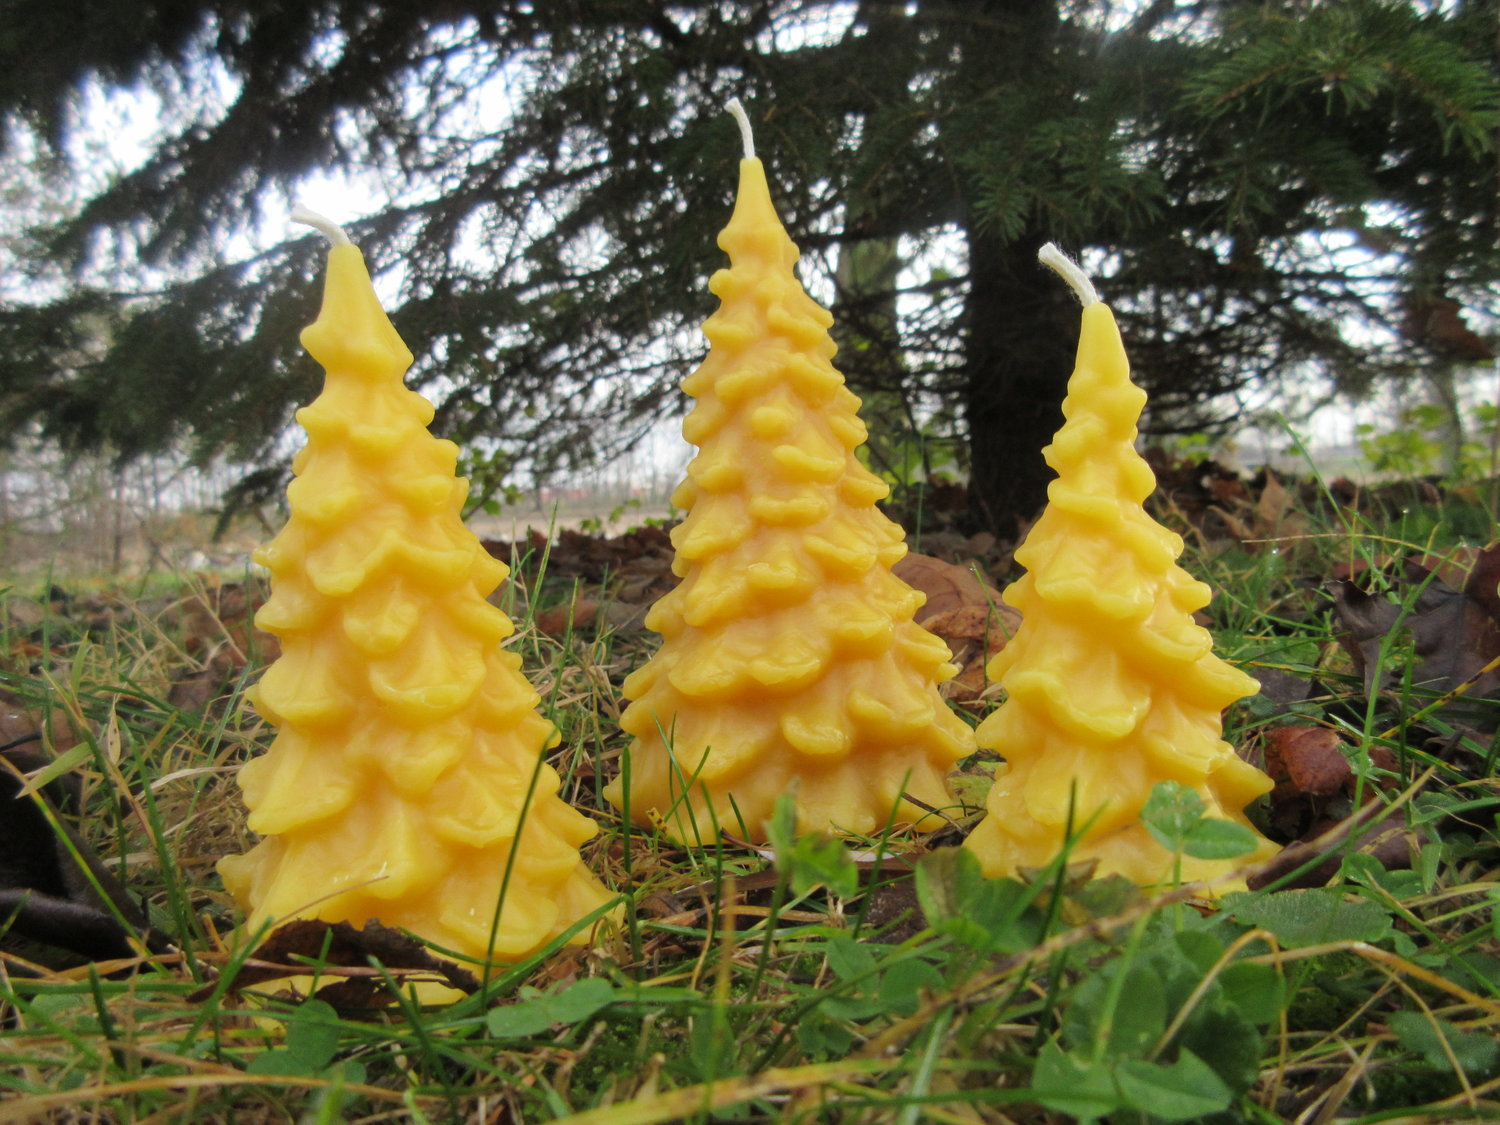 Starry Night Beeswax Candle Pair /Bees Wax Candles /Pine Tree Winter  /Reindeer